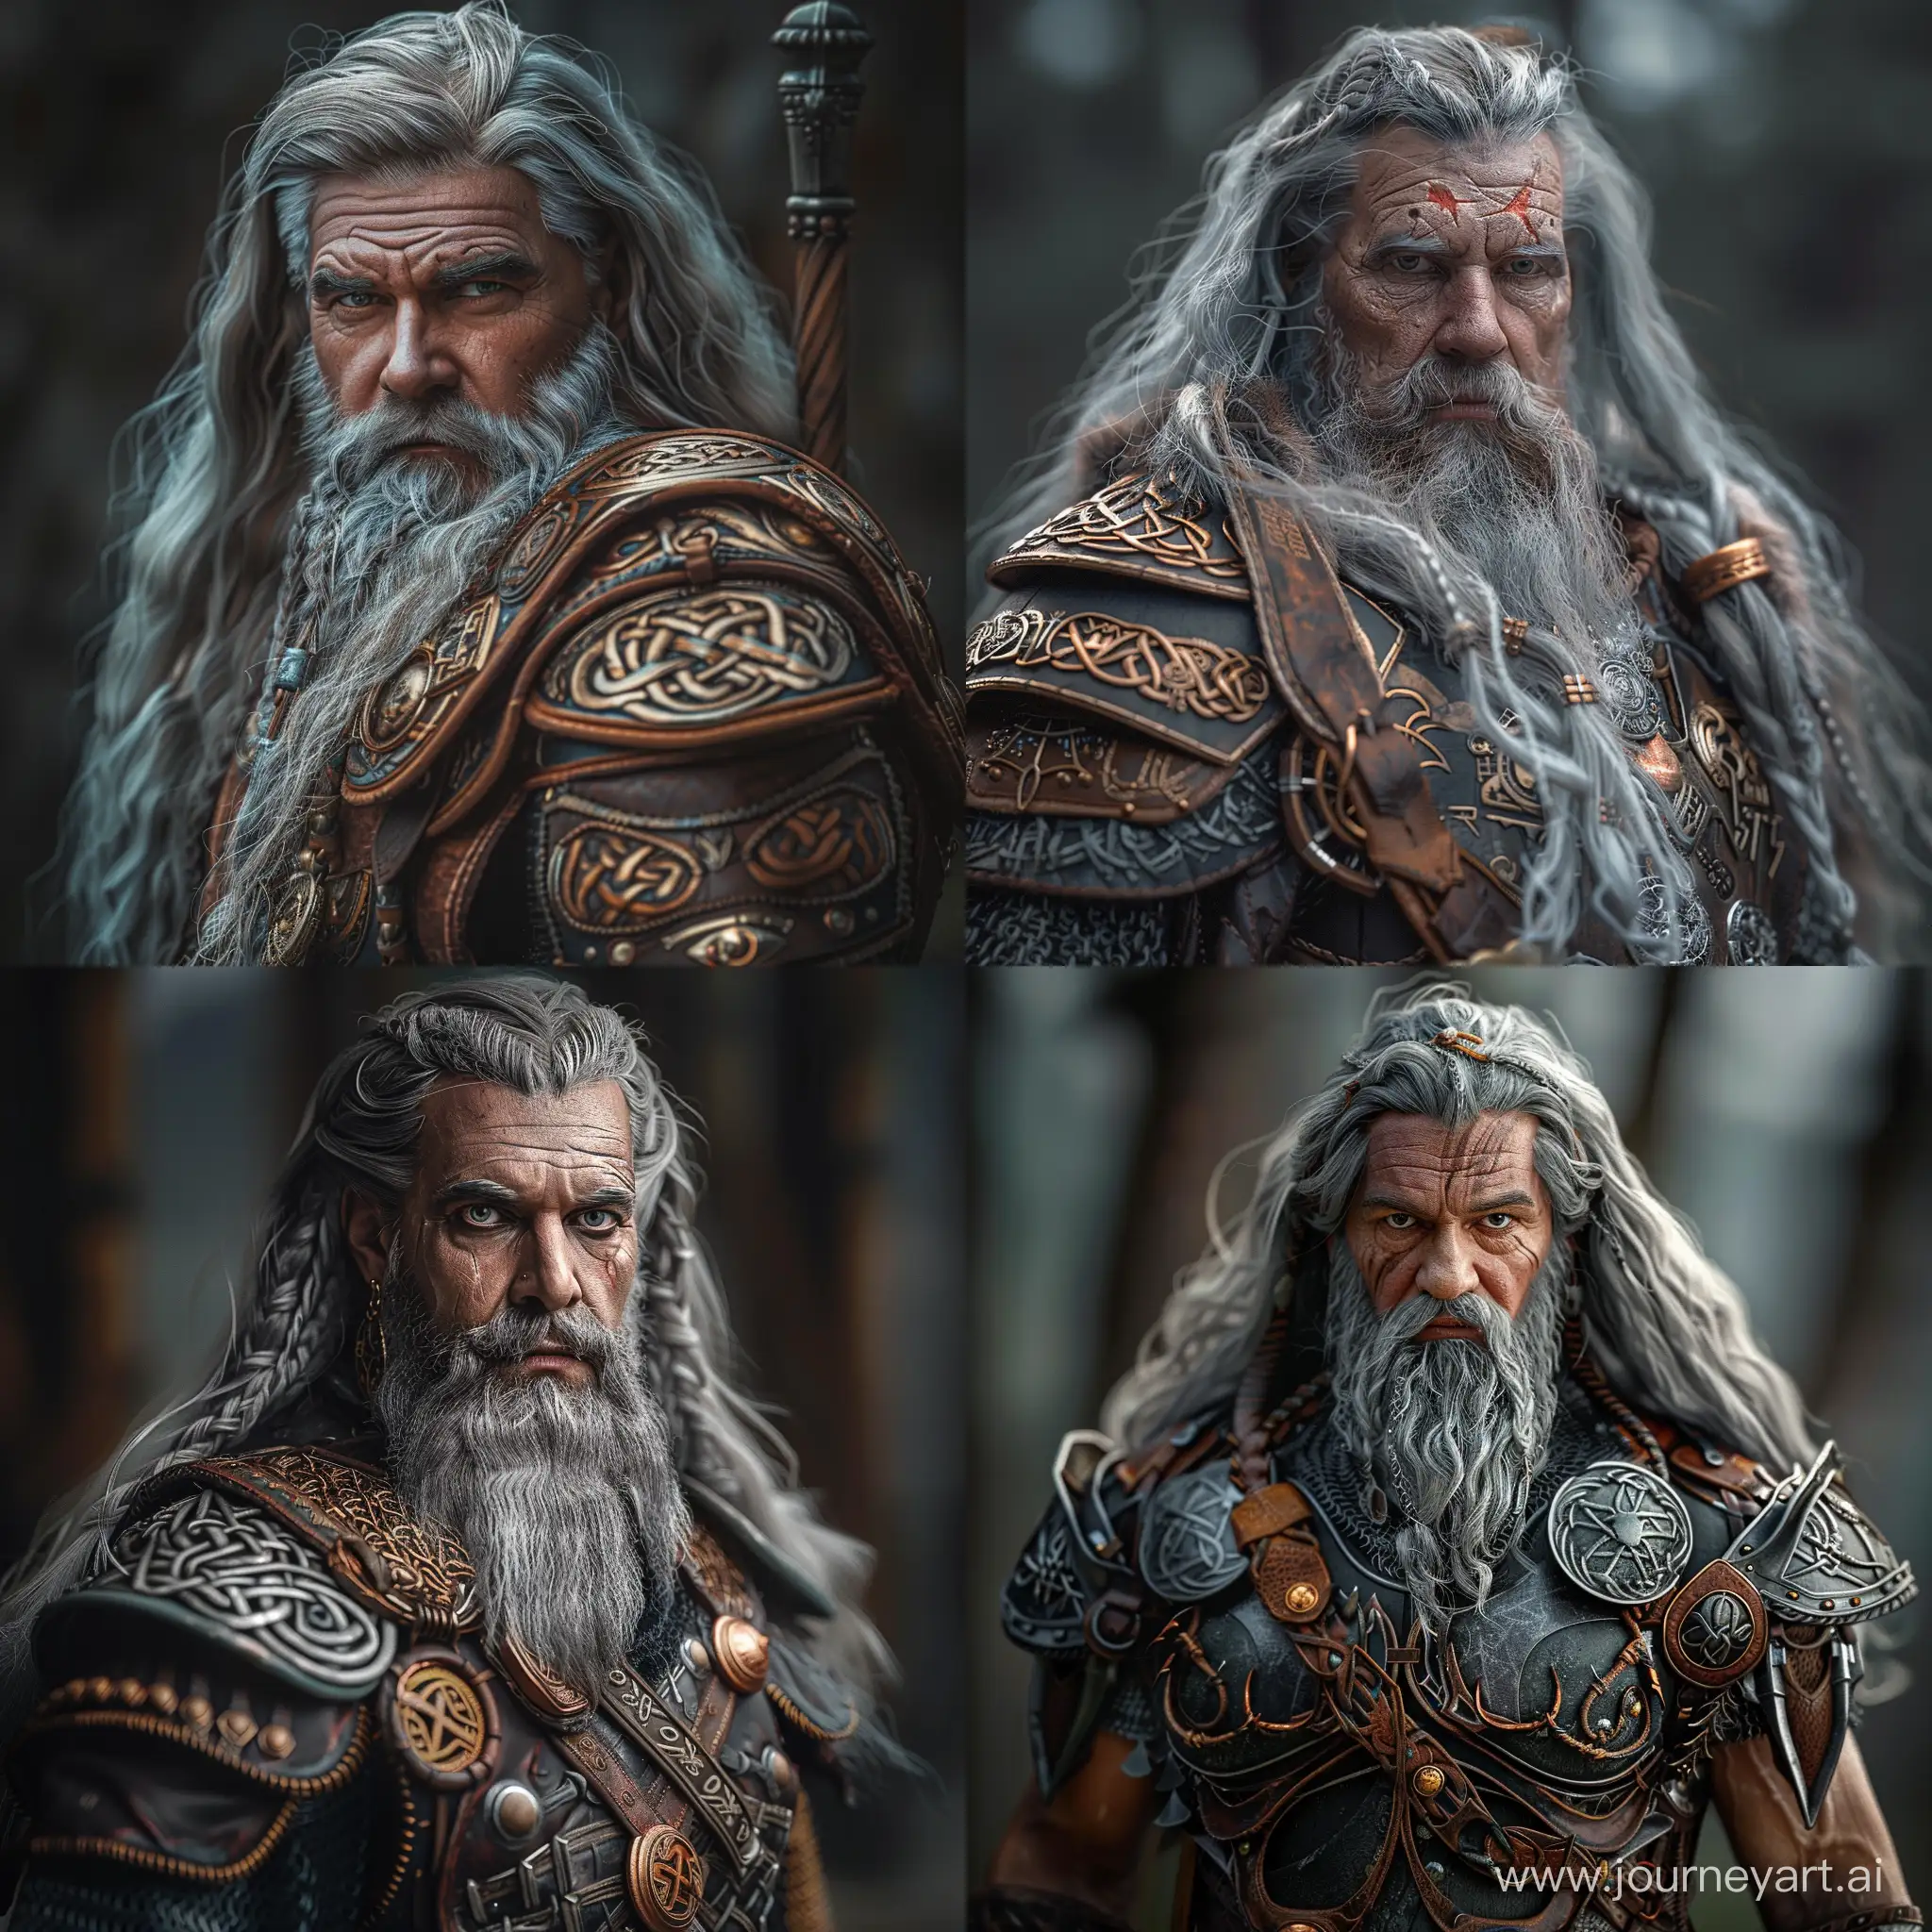 God Odin character, long grey hair and beard, war armor on him with leather and copper, ultra realistic, hyber detailed, modelcore, portrait photo. use sony a7 II camera with an 30mm lens fat F.1.2 aperture setting to blur the background and isolate the subject. use distinctive lighting on the subjects shot. The image should be shot in ultra-high resolution. --v 6